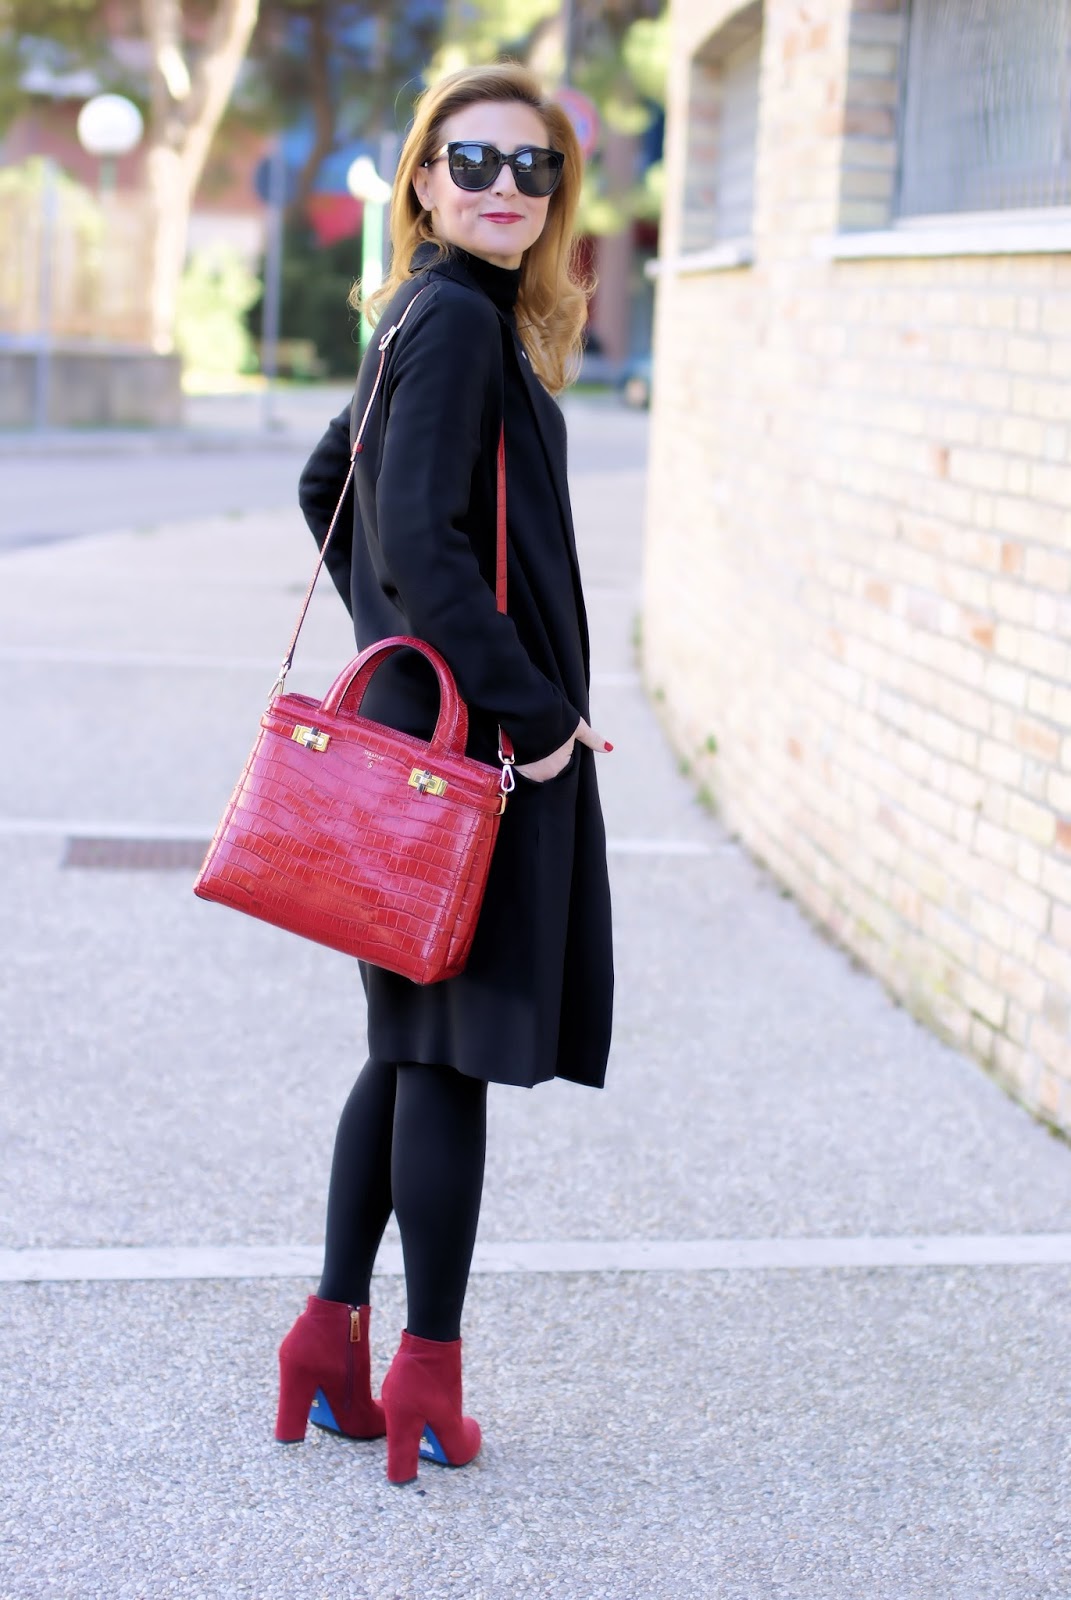 AVAVAV Firenze coat and Serapian Milano Meliné bag on Fashion and Cookies fashion blog, fashion blogger style